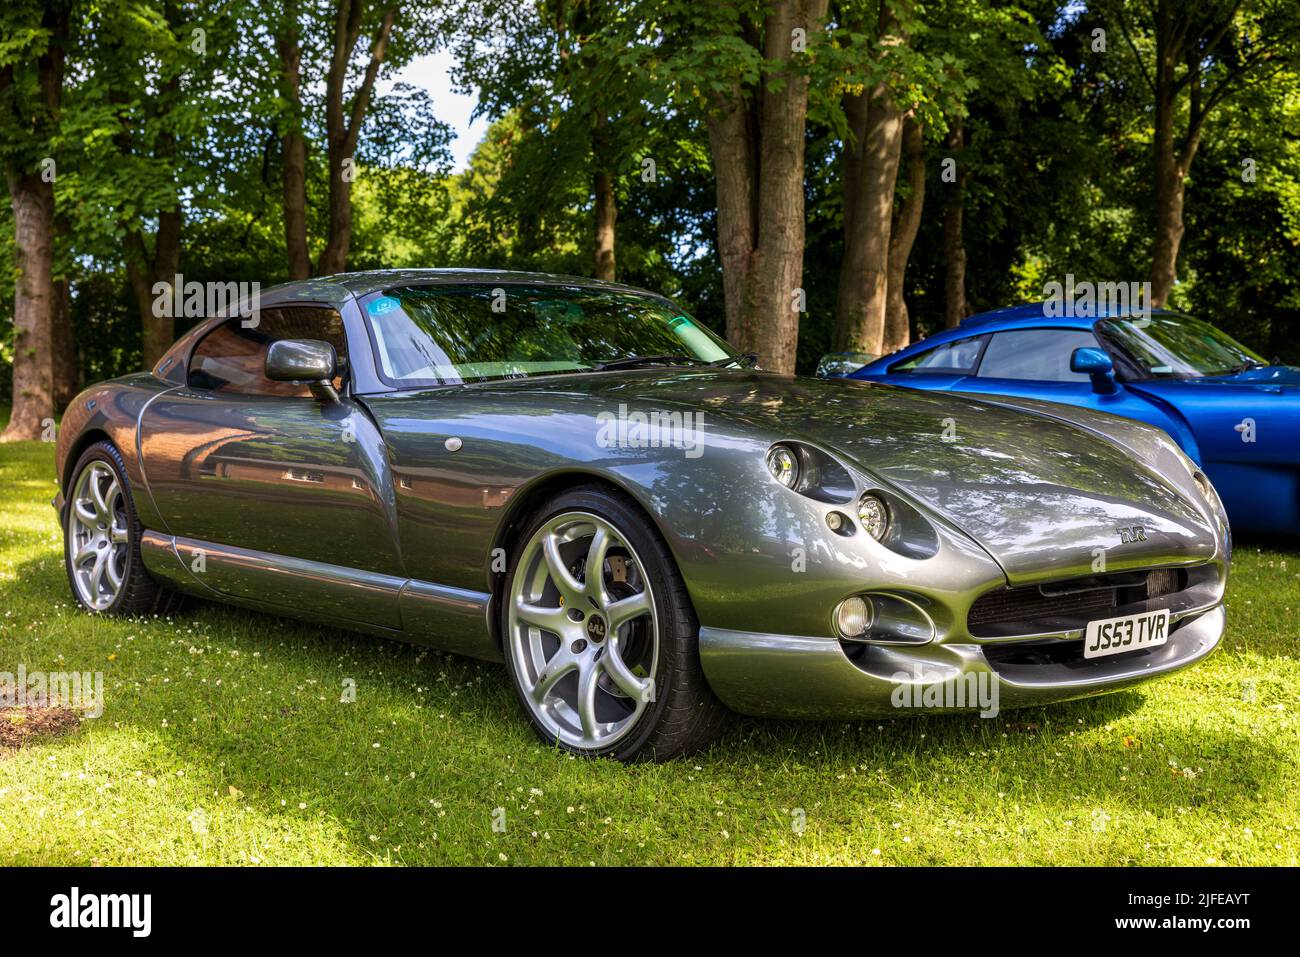 2003 TVR Cerbera ‘JS53TVR’ on display at the June Scramble held at the Bicester Heritage Centre on the 19th June 2022 Stock Photo